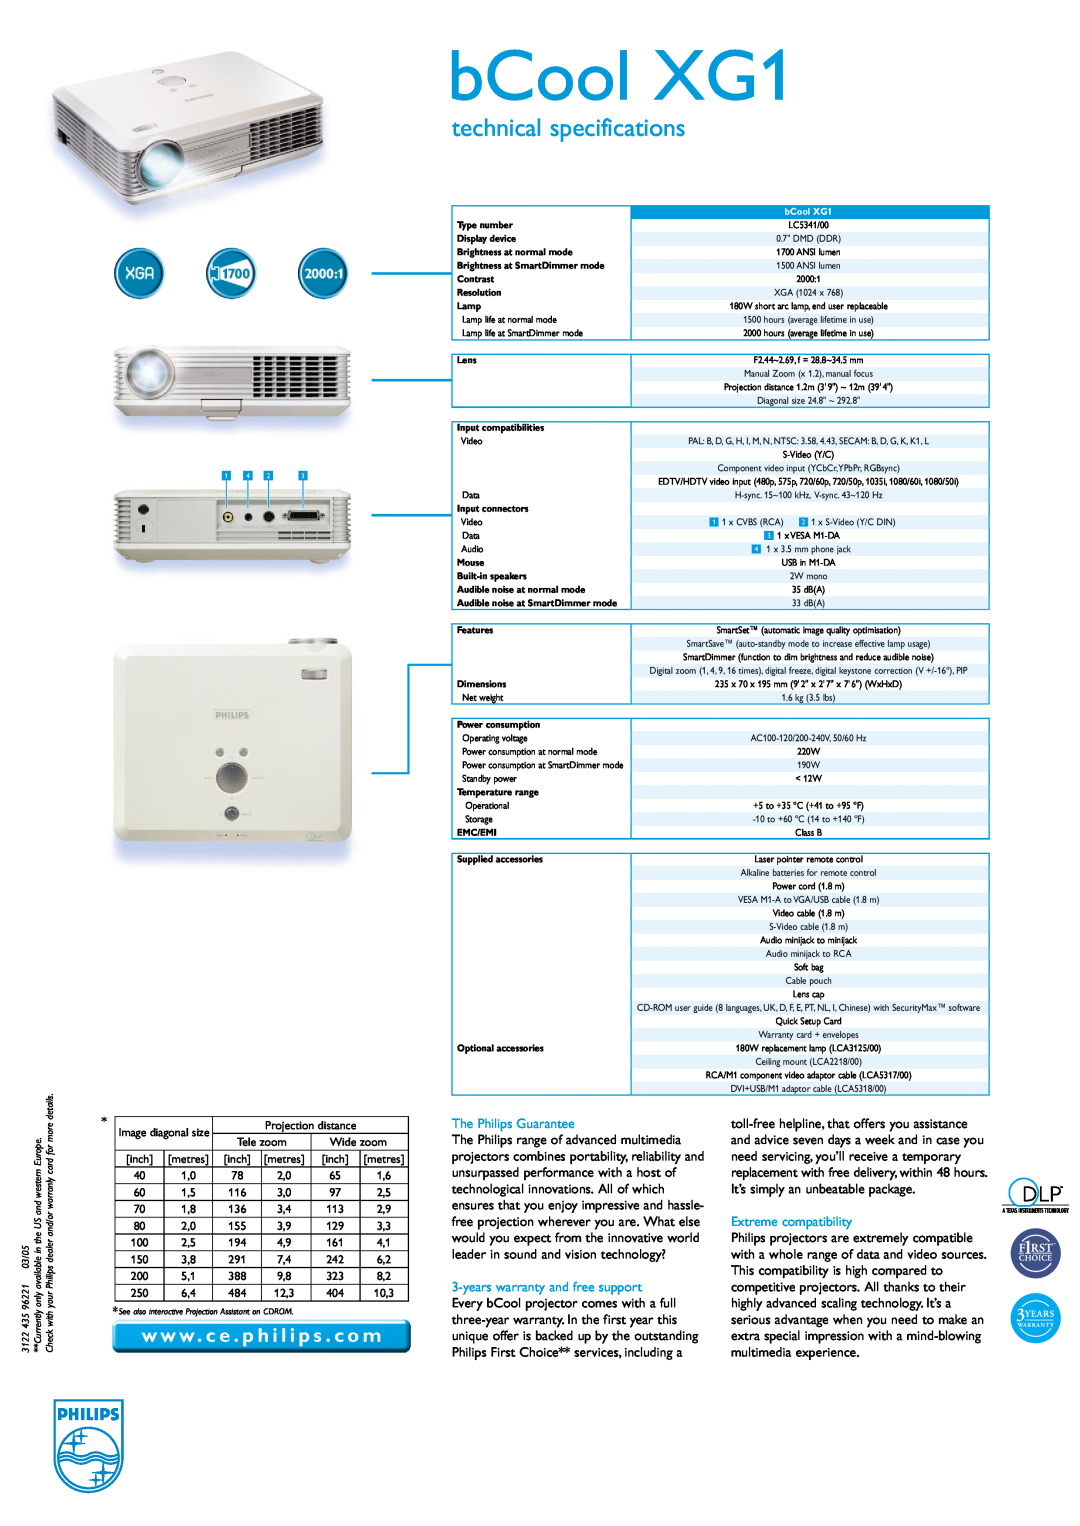 Philips manual bCool XG1, technical specifications, w w w . c e . p h i l i p s . c o m, The Philips Guarantee 